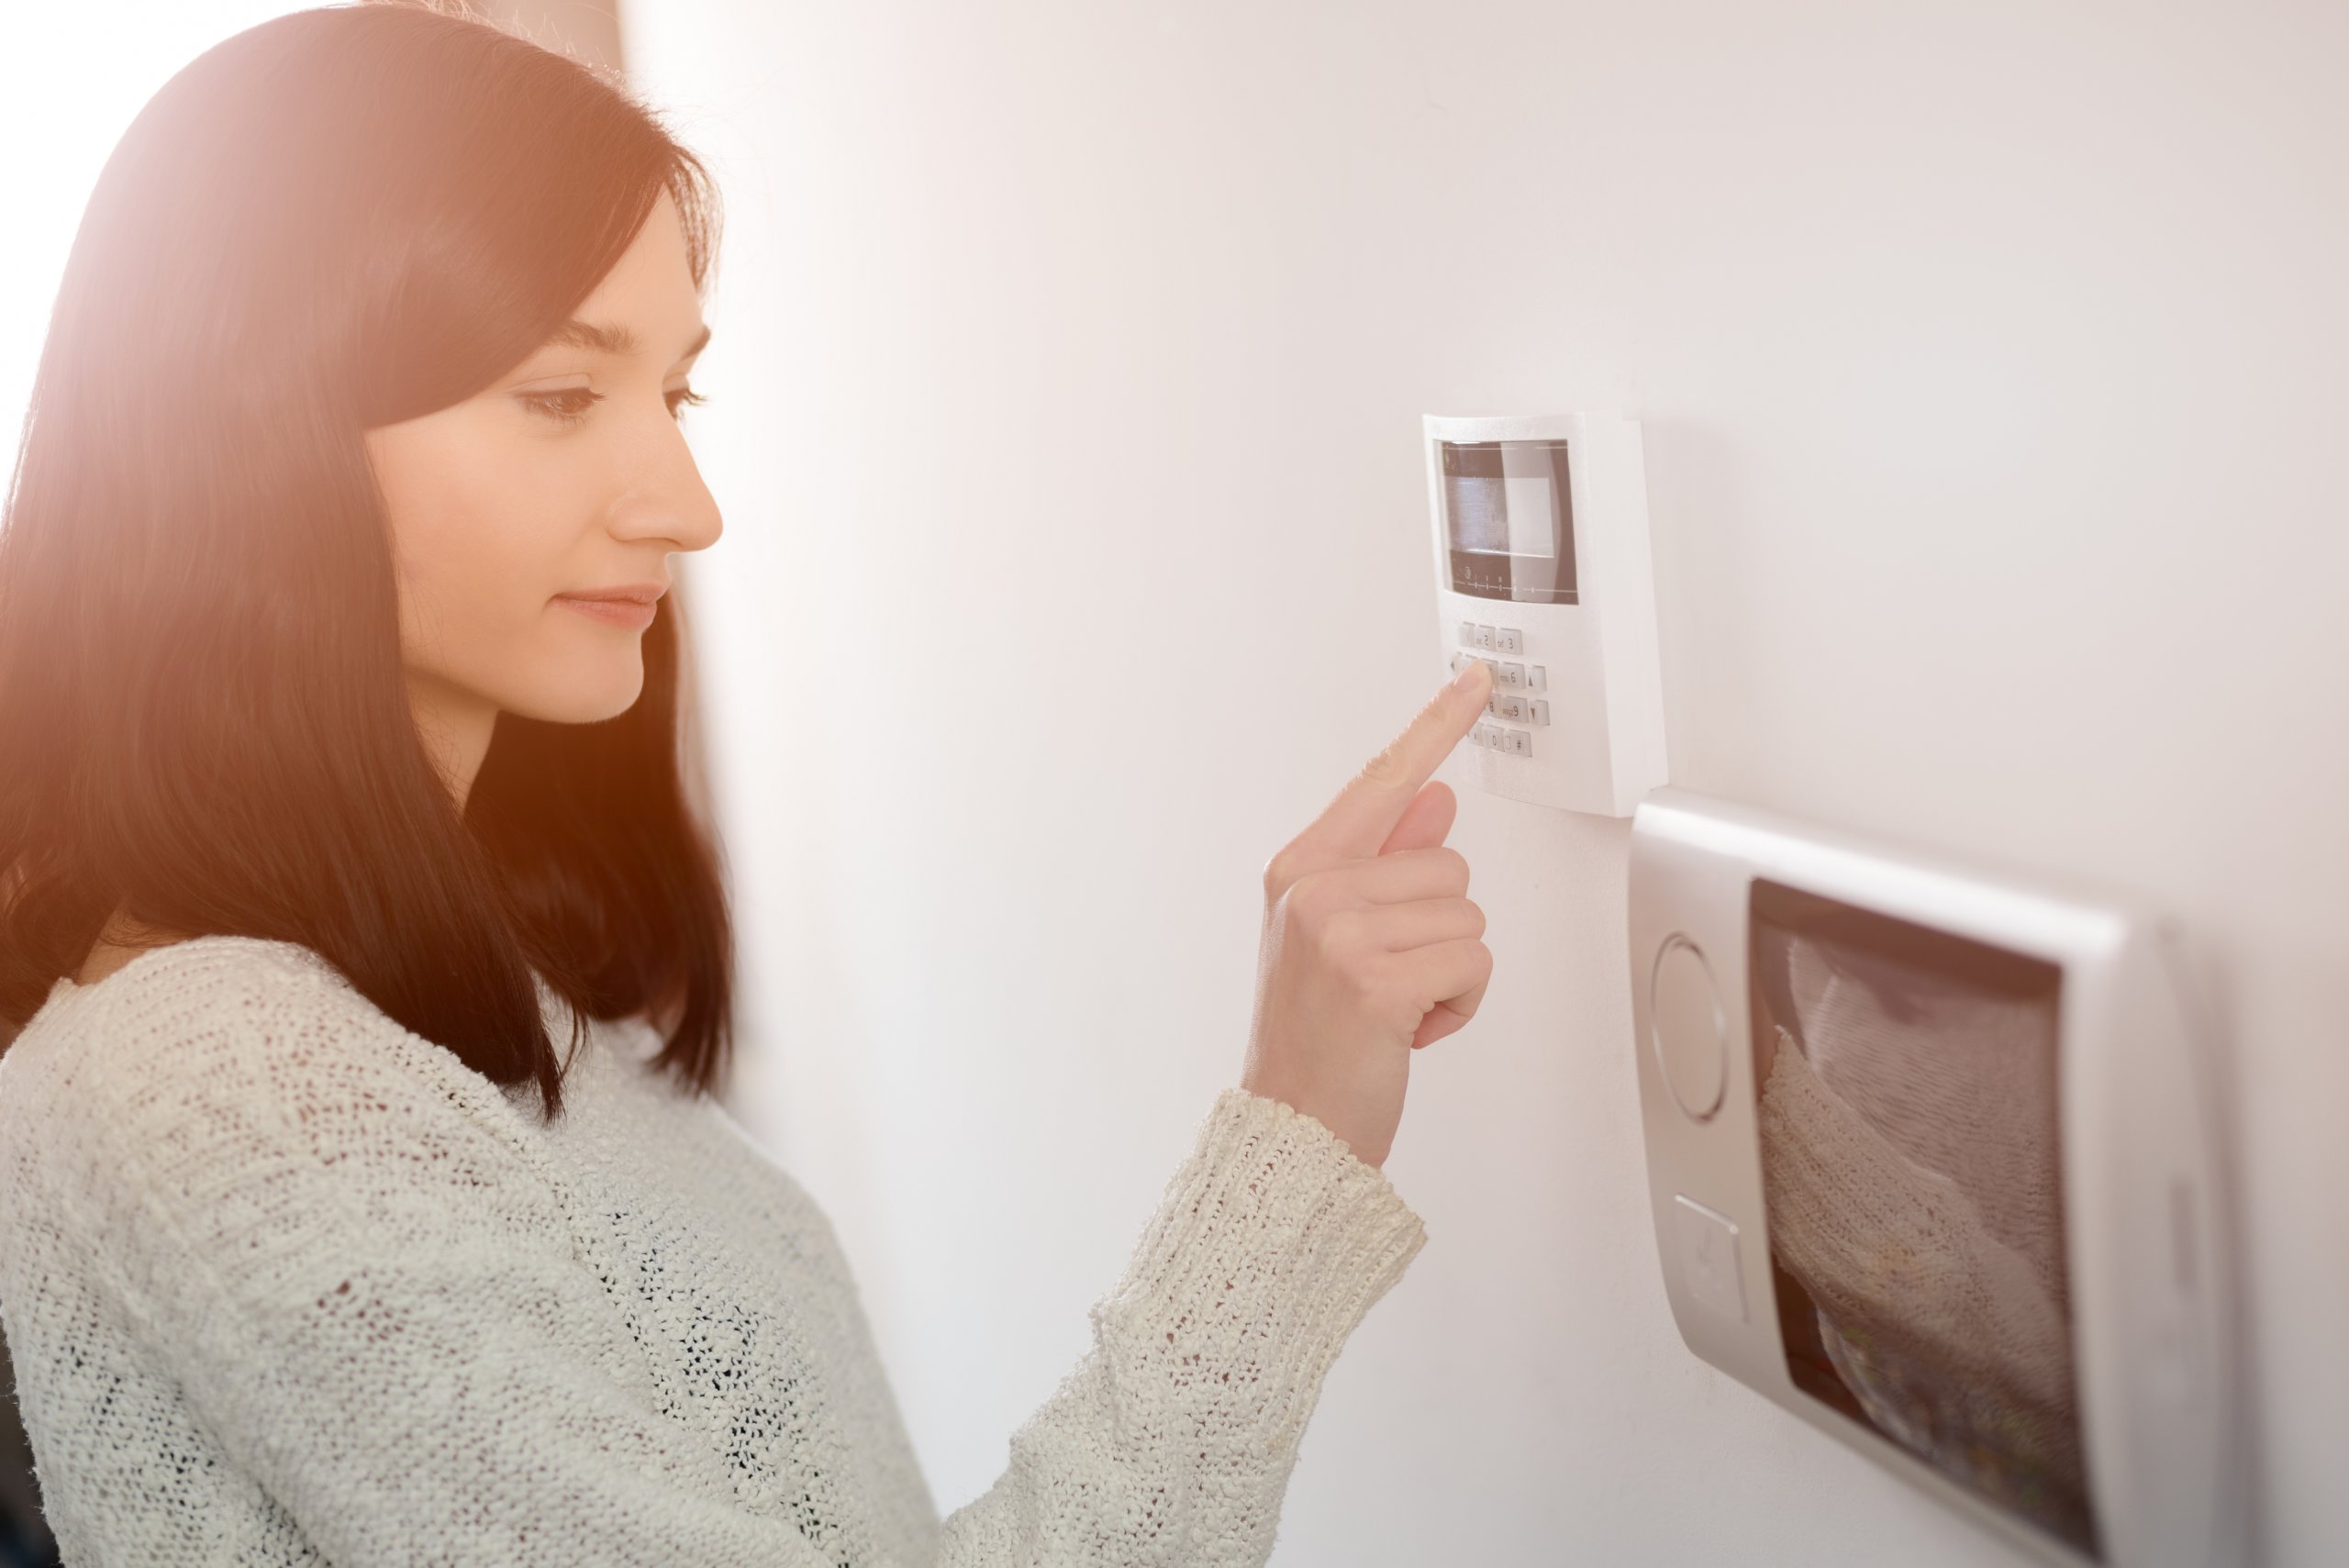 security systems in sunnyvale